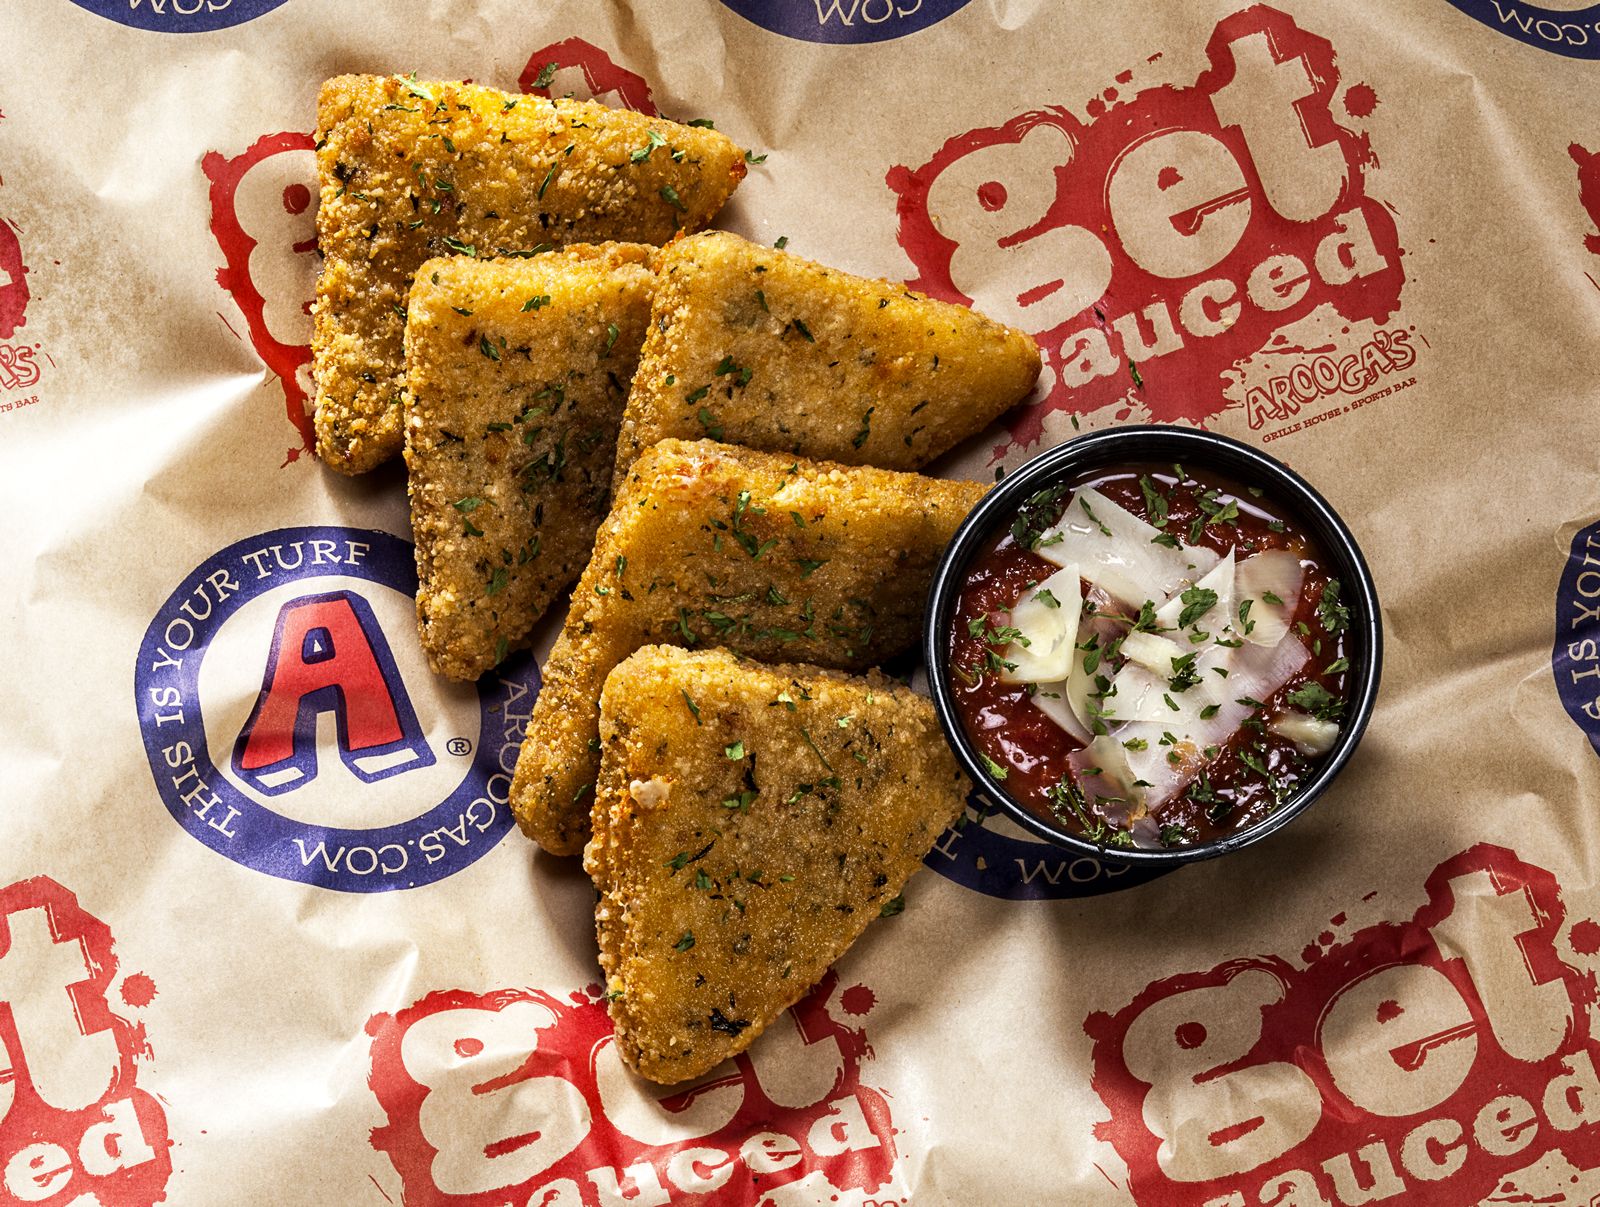 Arooga's Grille House & Sports Bar Hand-Breaded Mozz Triangles